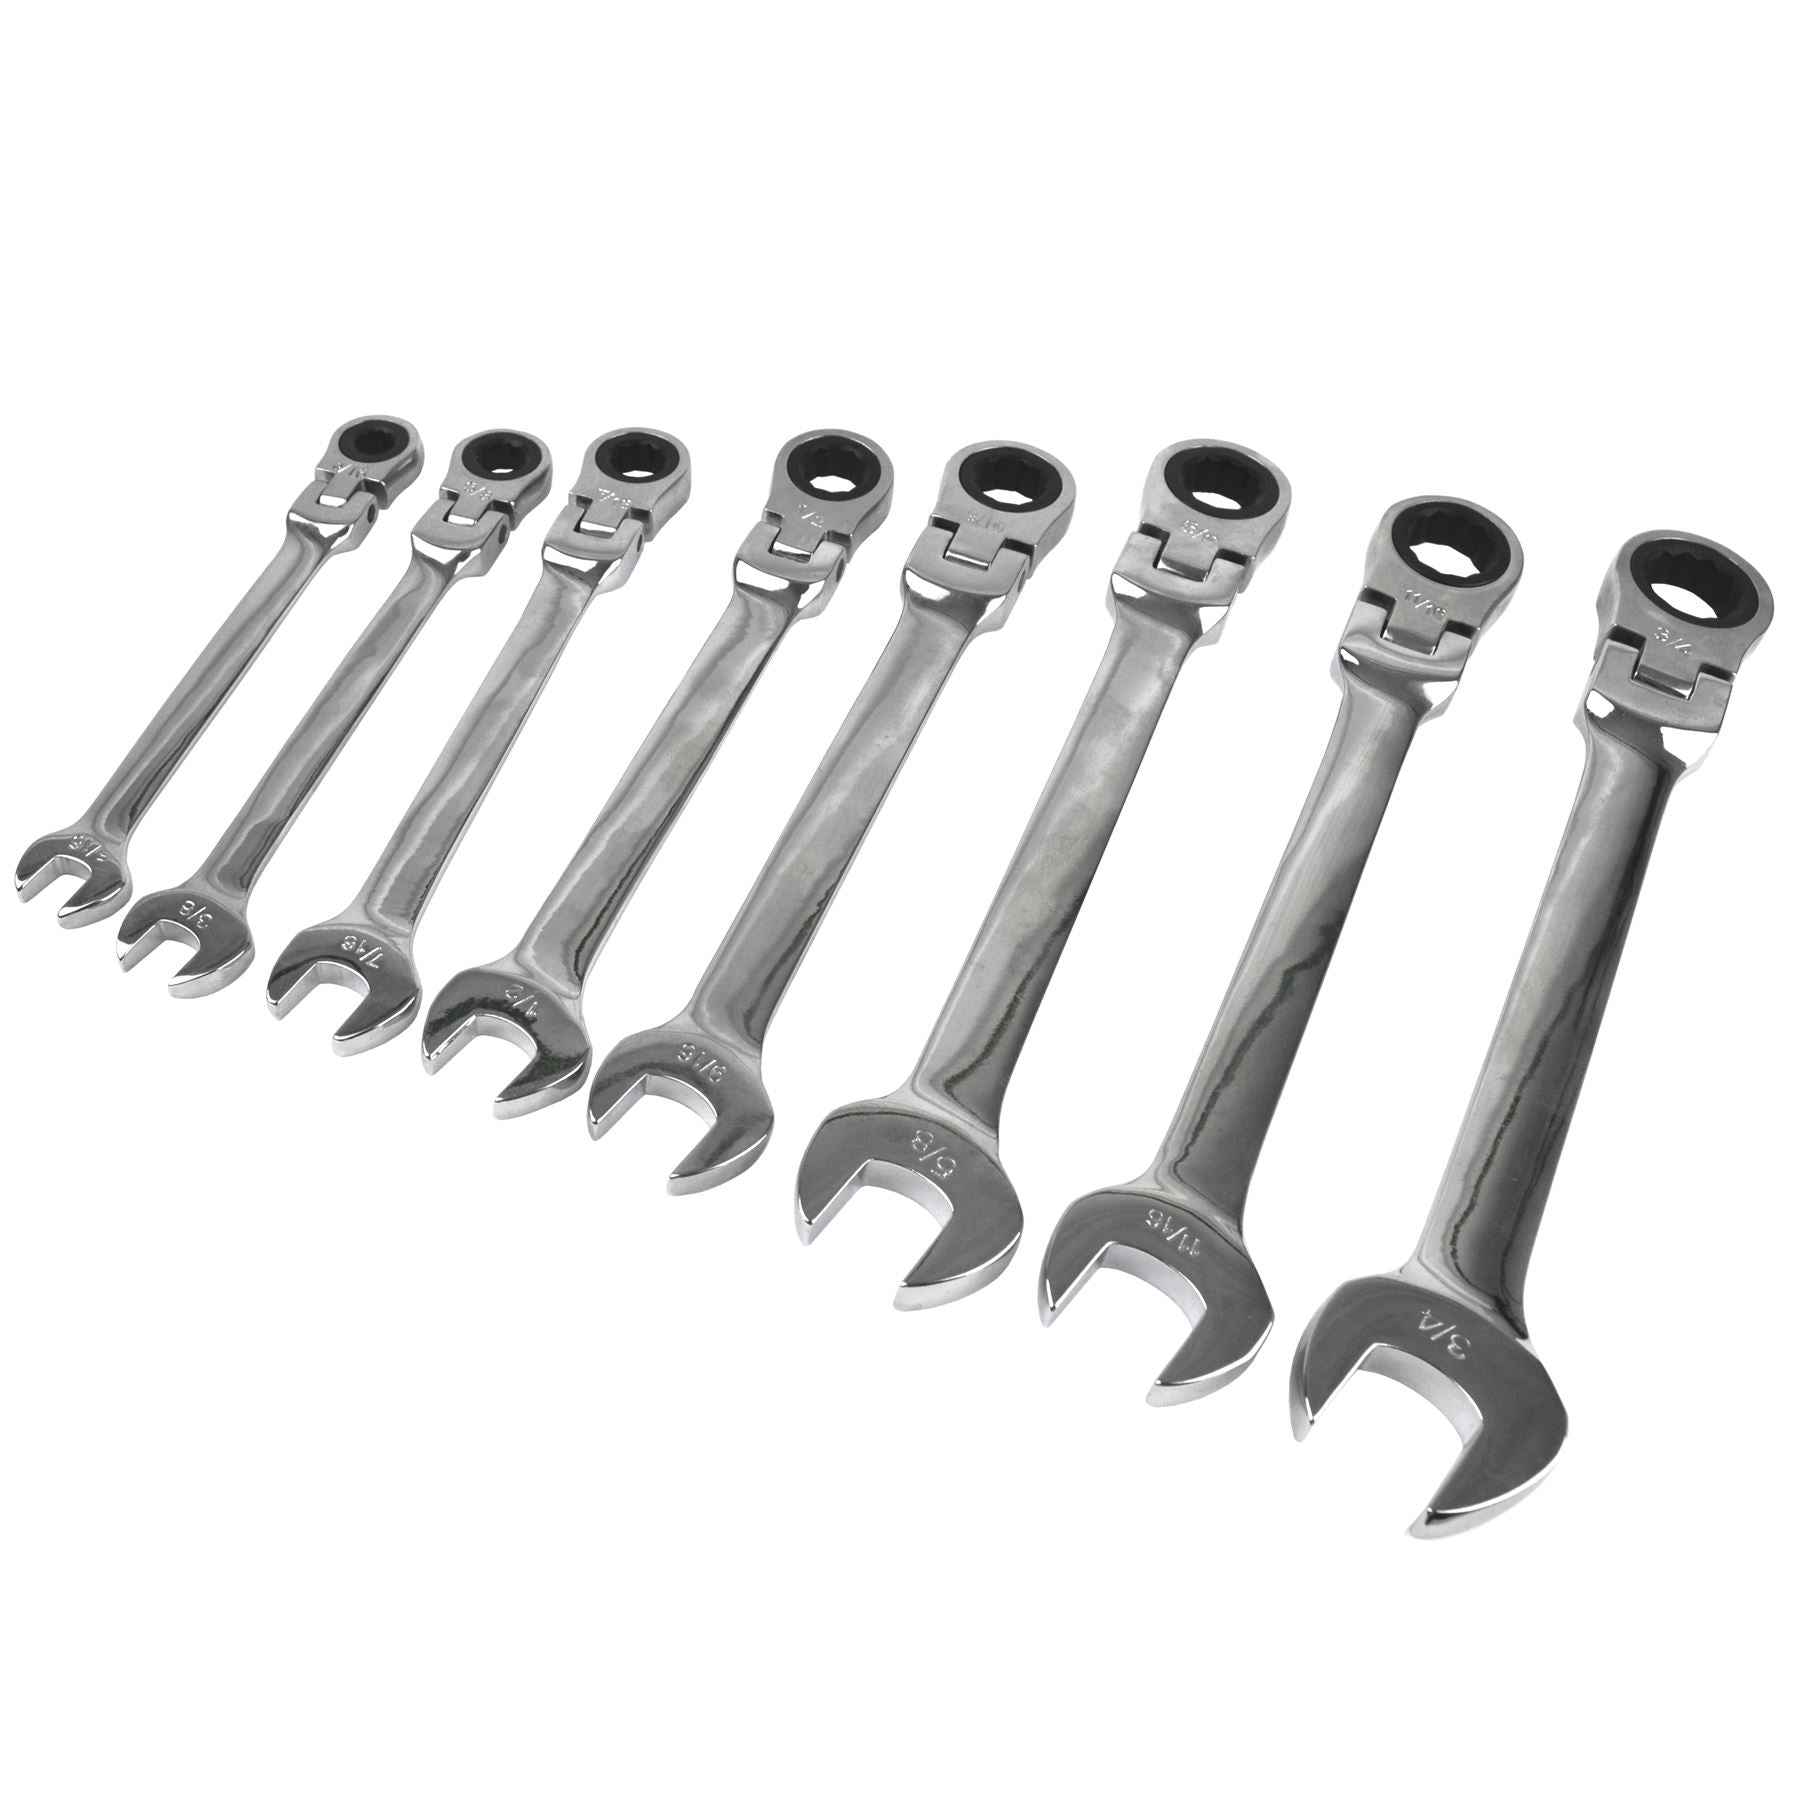 Imperial SAE AF UNF/UNC Flexi Ratchet Spanner Set 5/16" - 3/4" 8pc Wrench TE493